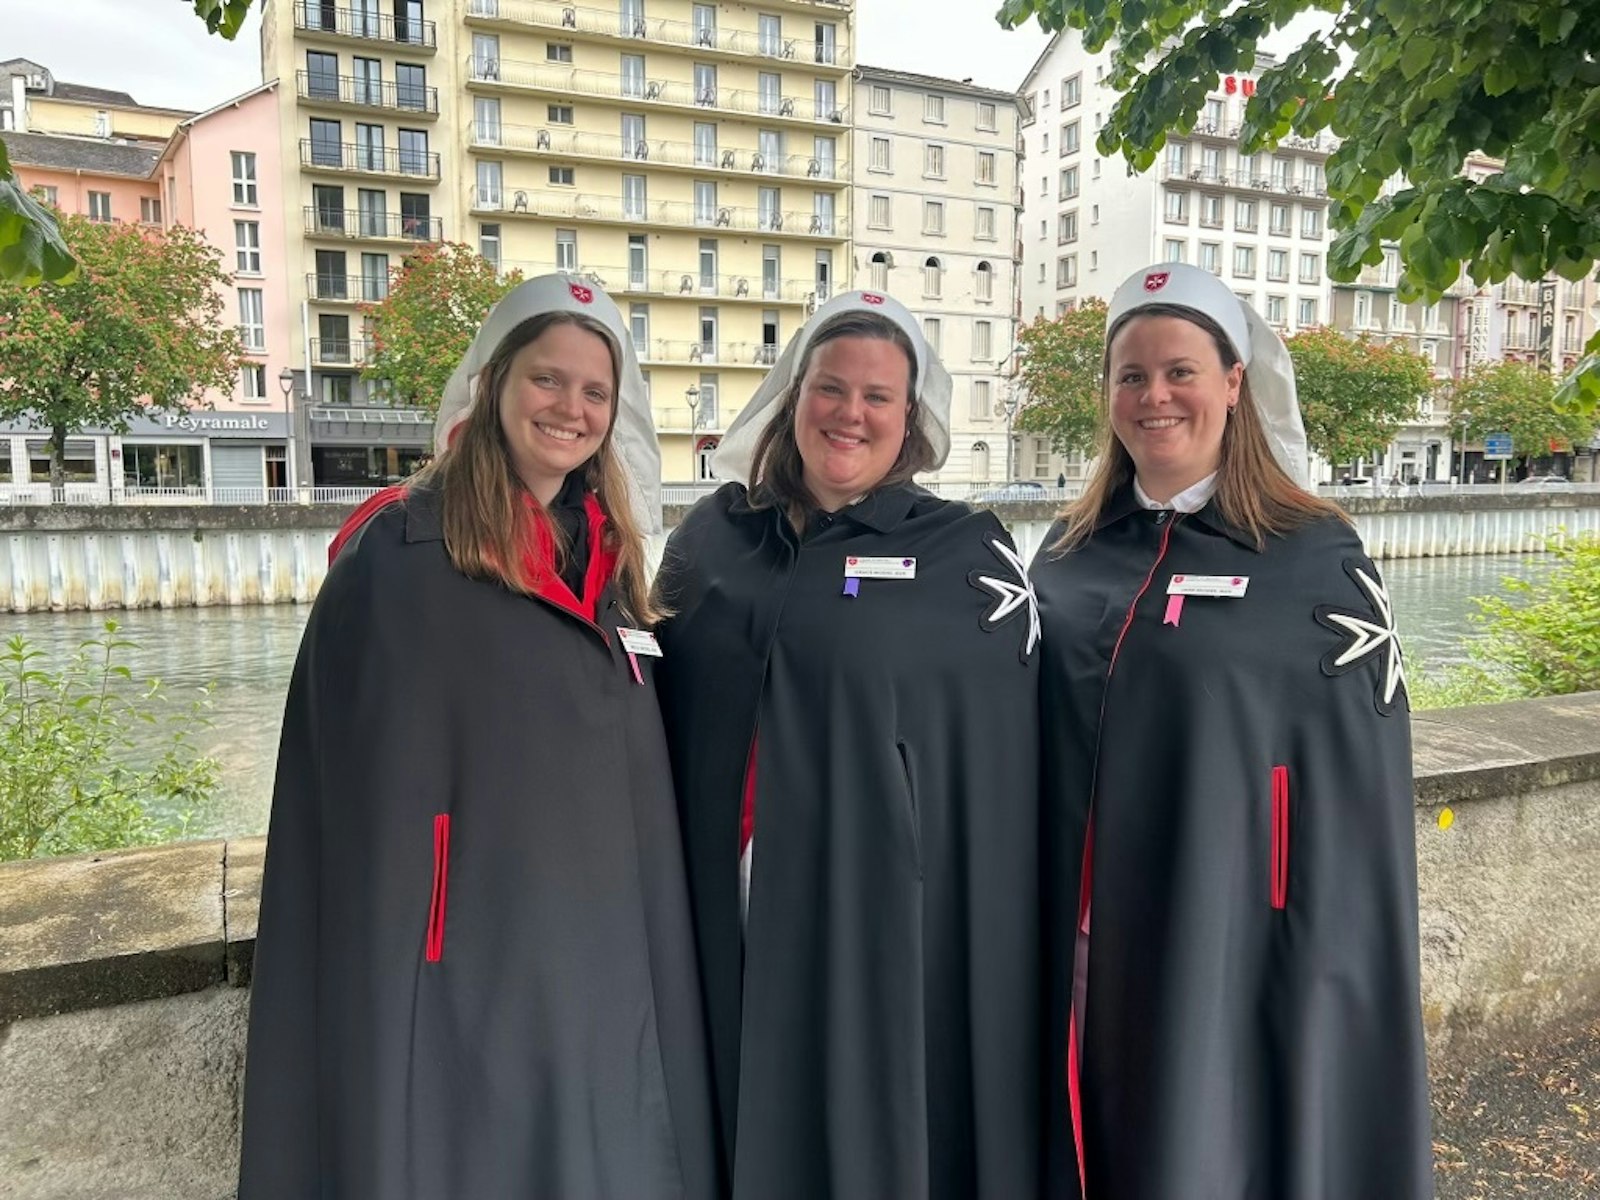 Although many pilgrims visit Lourdes each year hoping for healing, not everyone is healed. However, everyone who visits Lourdes returns with a story of God's grace, Modes said.